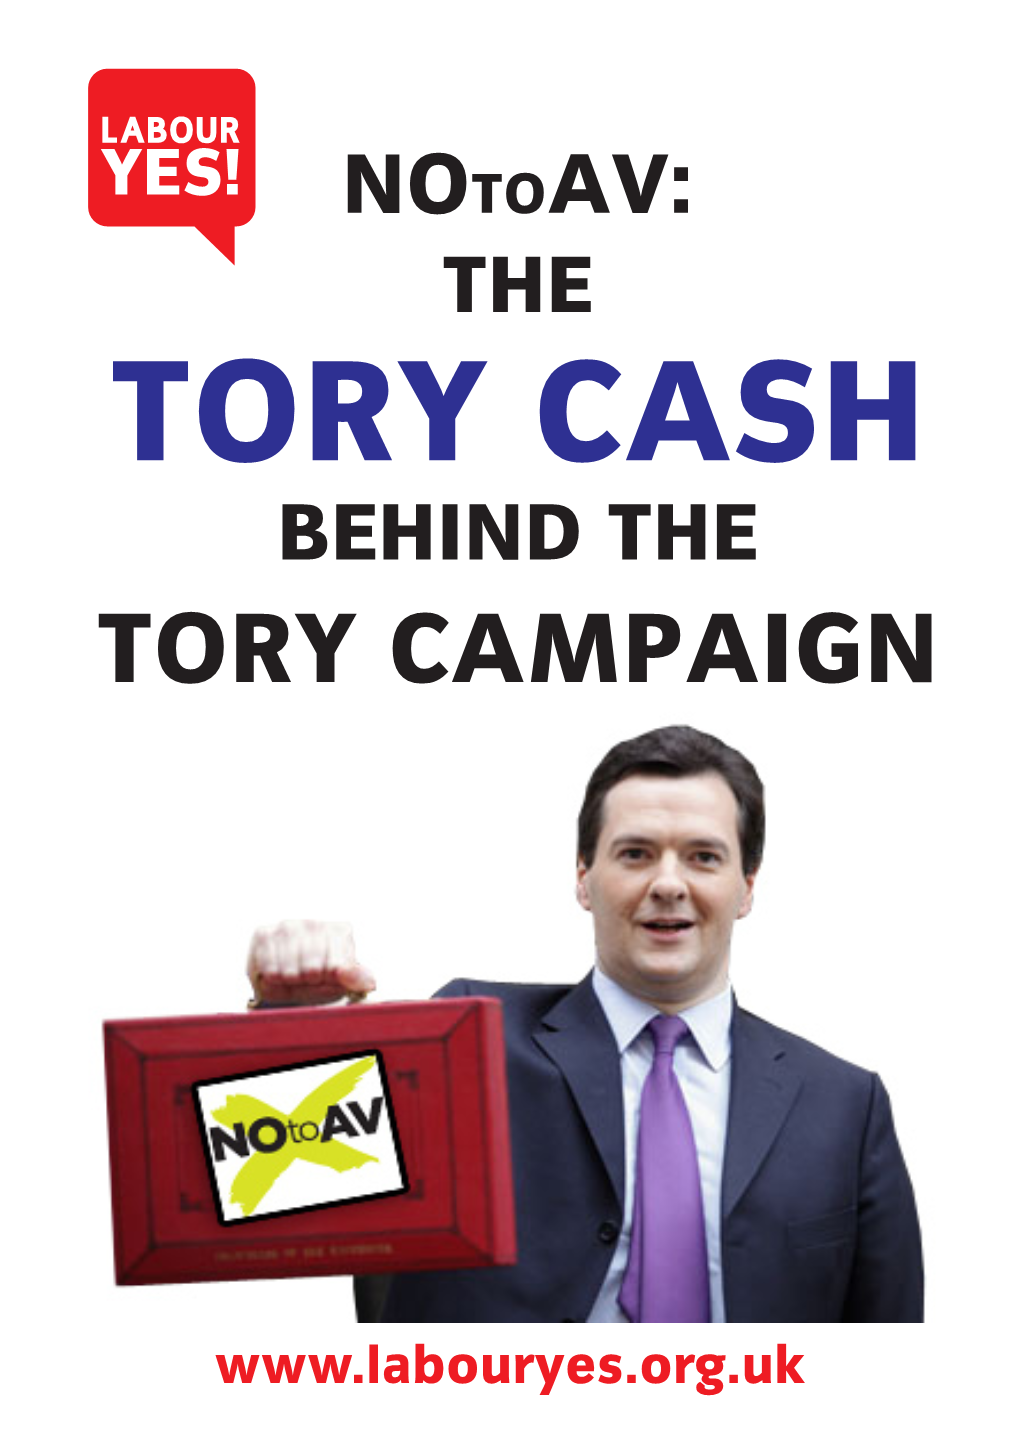 Tory Cash Behind the Tory Campaign